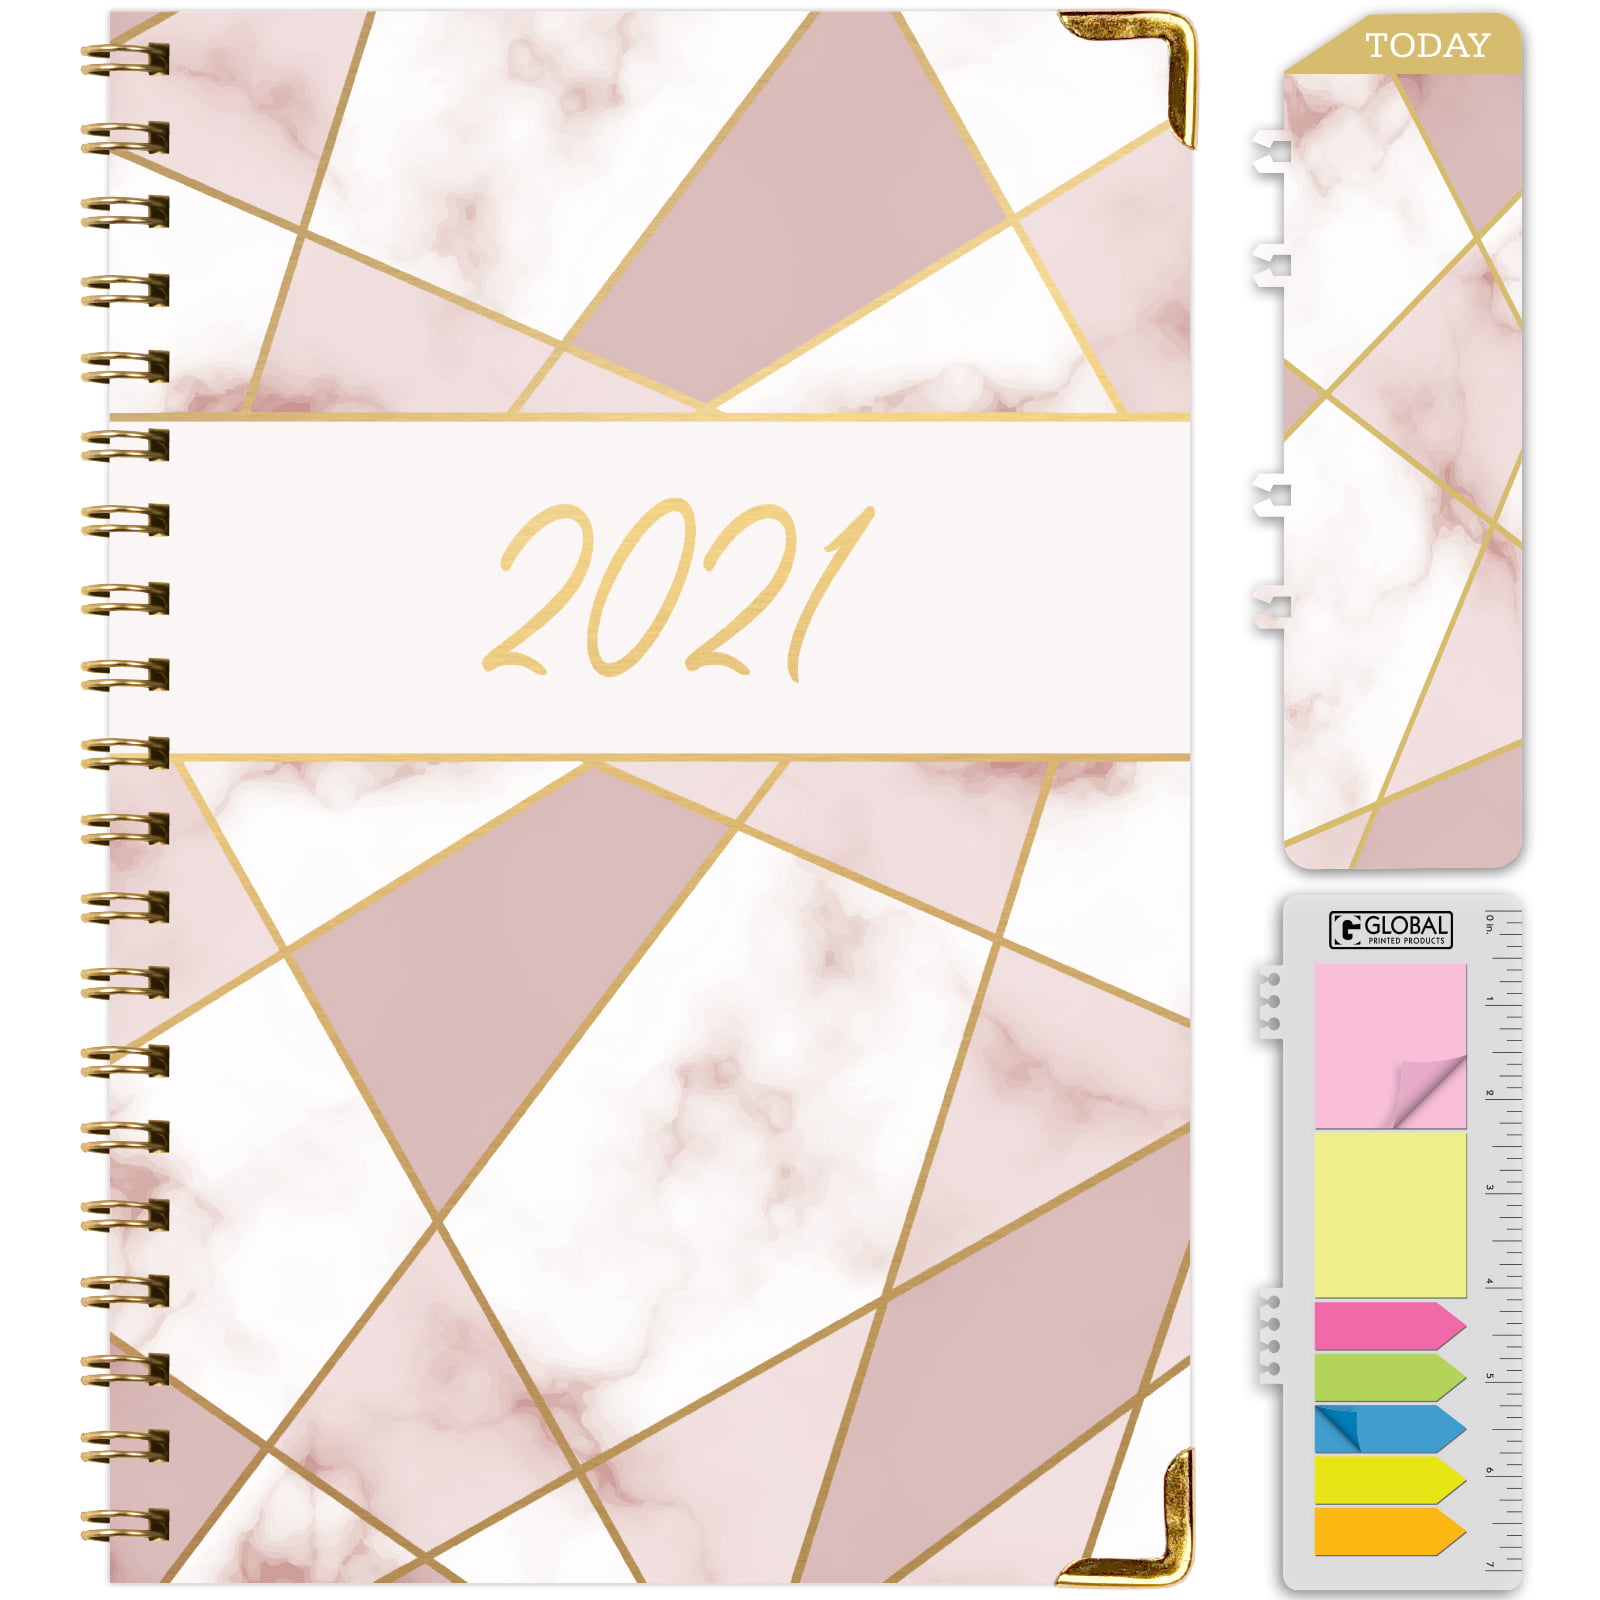 Pocket Folder and Sticky Note Set November 2020 Through December 2021 5.5x8 Daily Weekly Monthly Planner Yearly Agenda Bookmark HARDCOVER 2021 Planner: Colorful Marble 